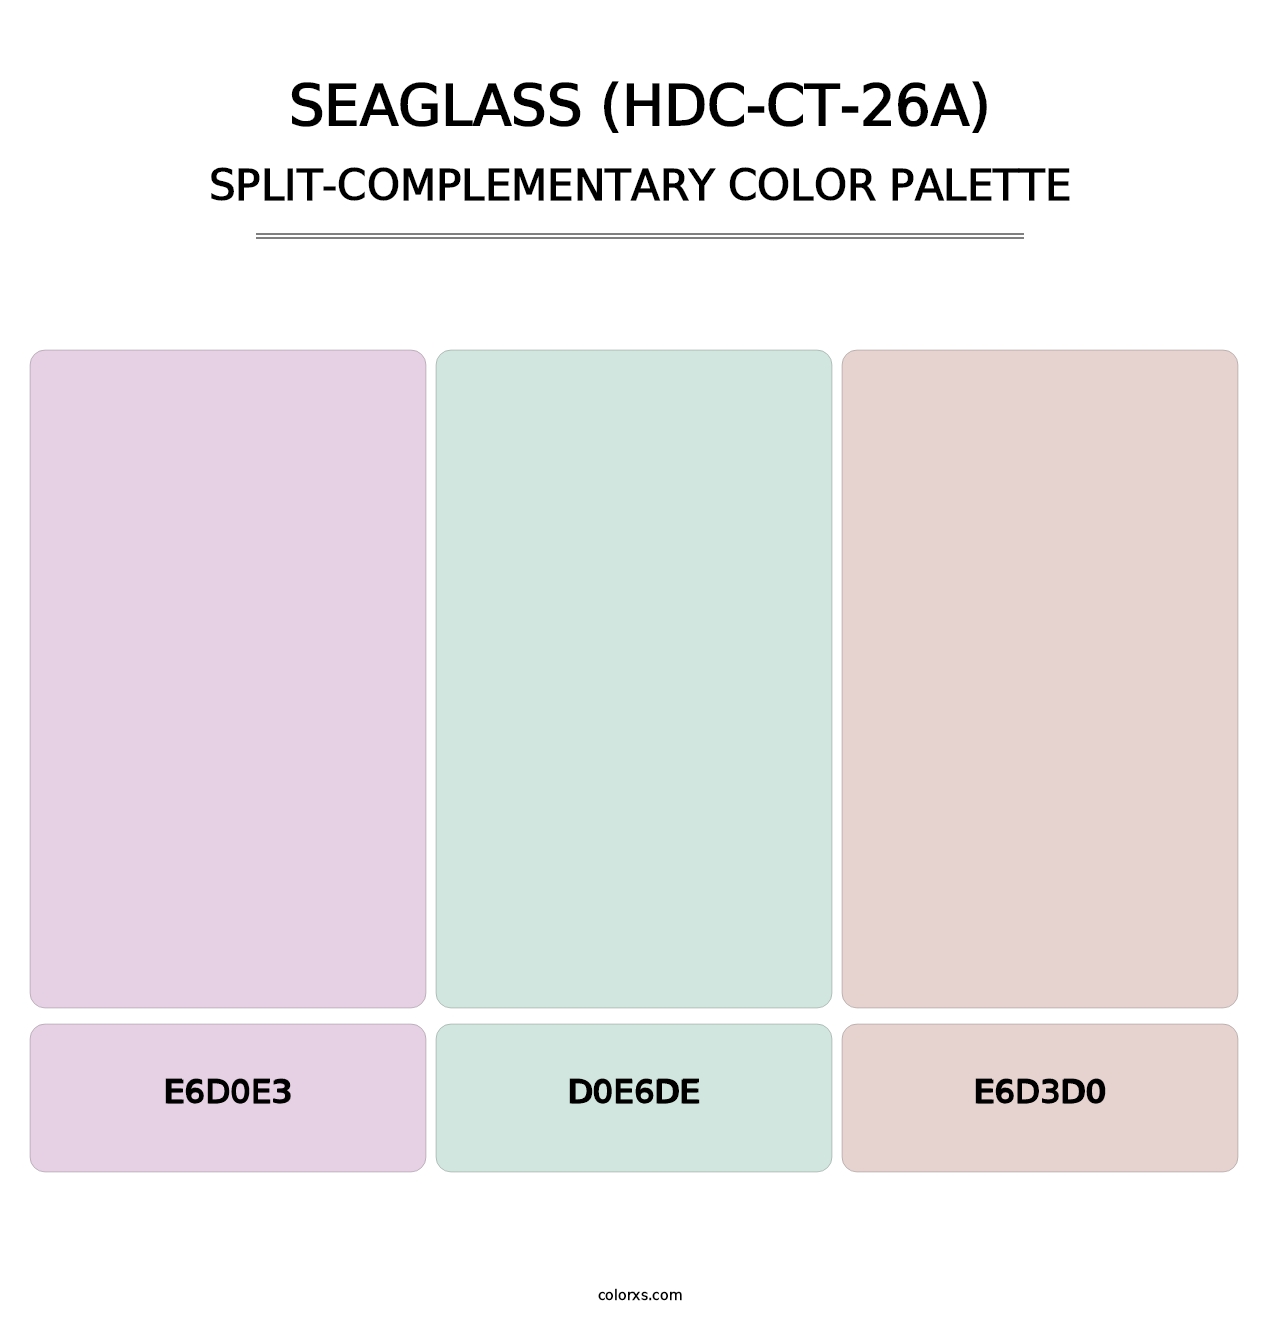 Seaglass (HDC-CT-26A) - Split-Complementary Color Palette